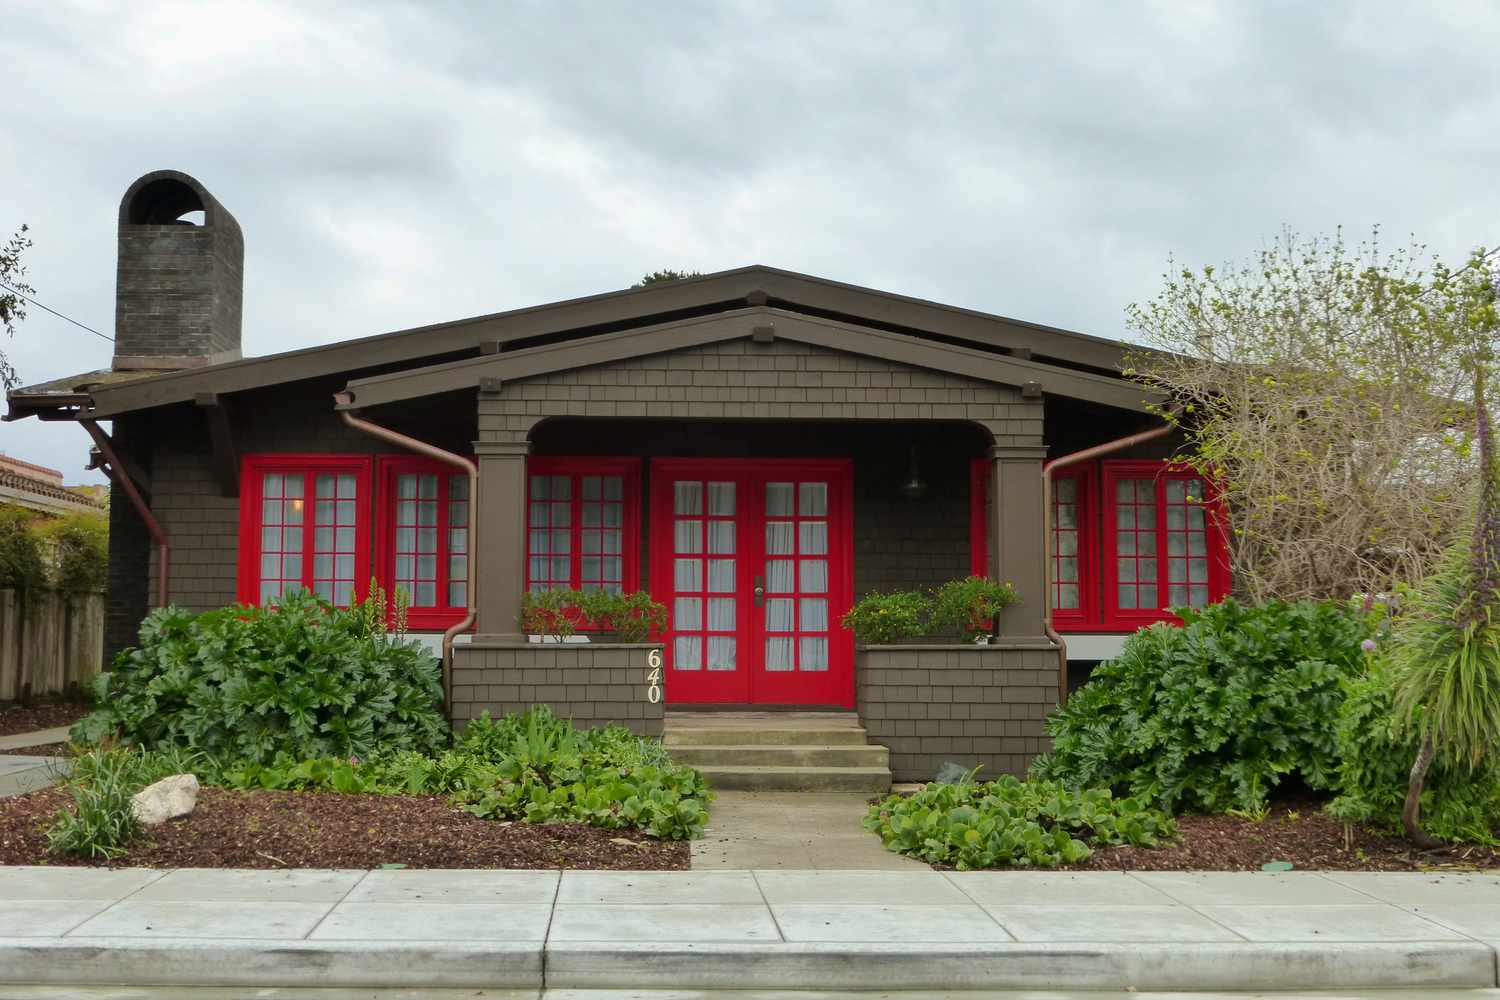 Front view of brown-shingled bungalow with red doors and windows